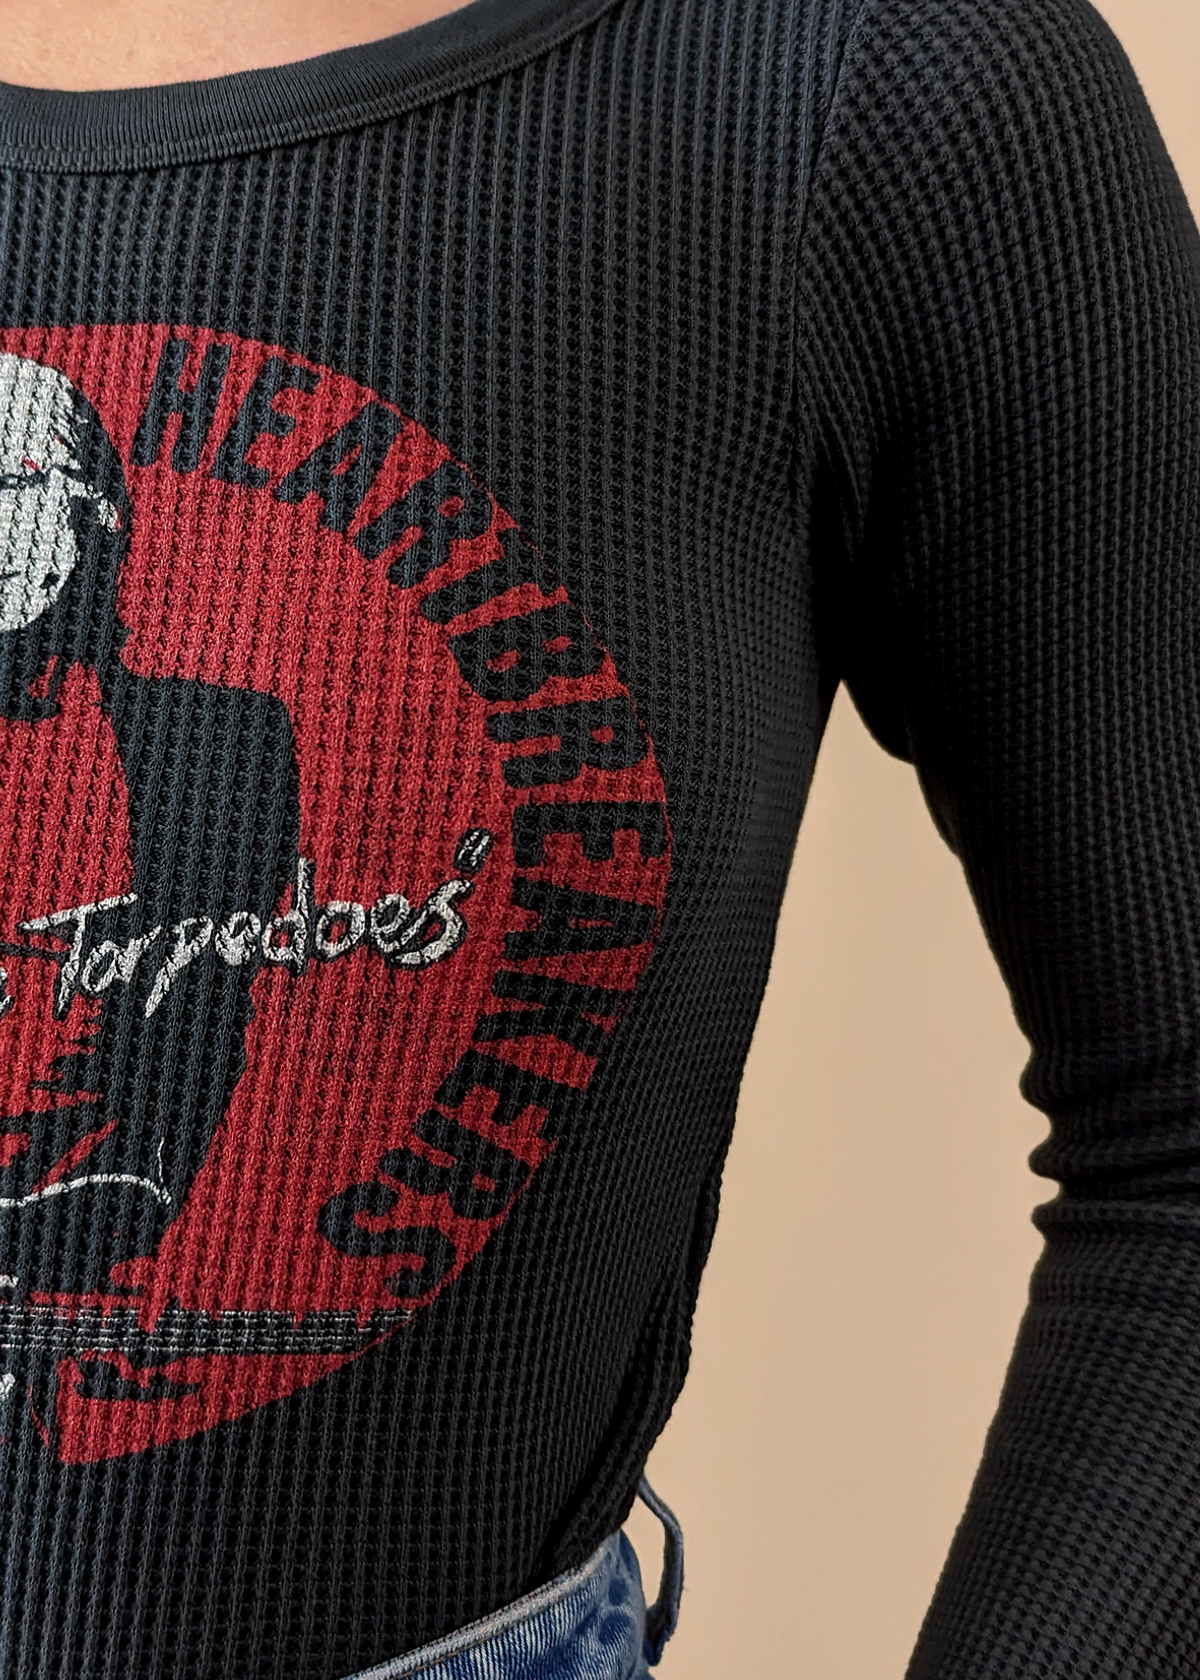 Daydreamer LA Tom Petty and the Heartbreakers Thermal Long Sleeve Tee USA made officially licensed